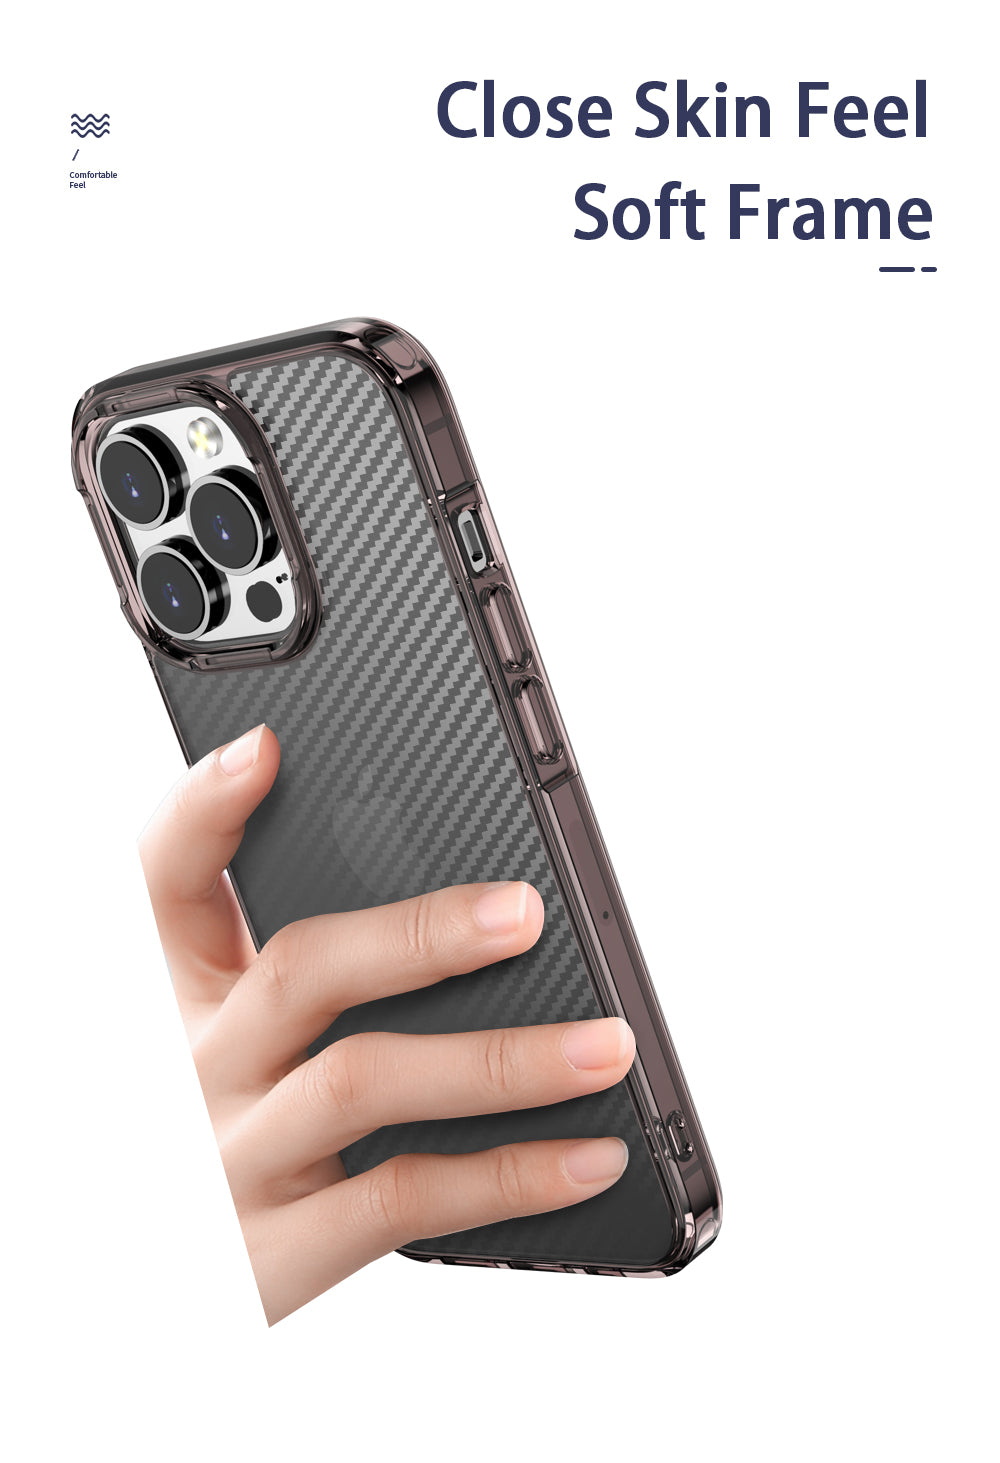 Carbon Fiber Transparent Shockproof Case For iPhone 13 12 Pro Max Clear Soft TPU Bumper Hard PC Back Cover For iPhone 13 12 Mini The Clothing Company Sydney